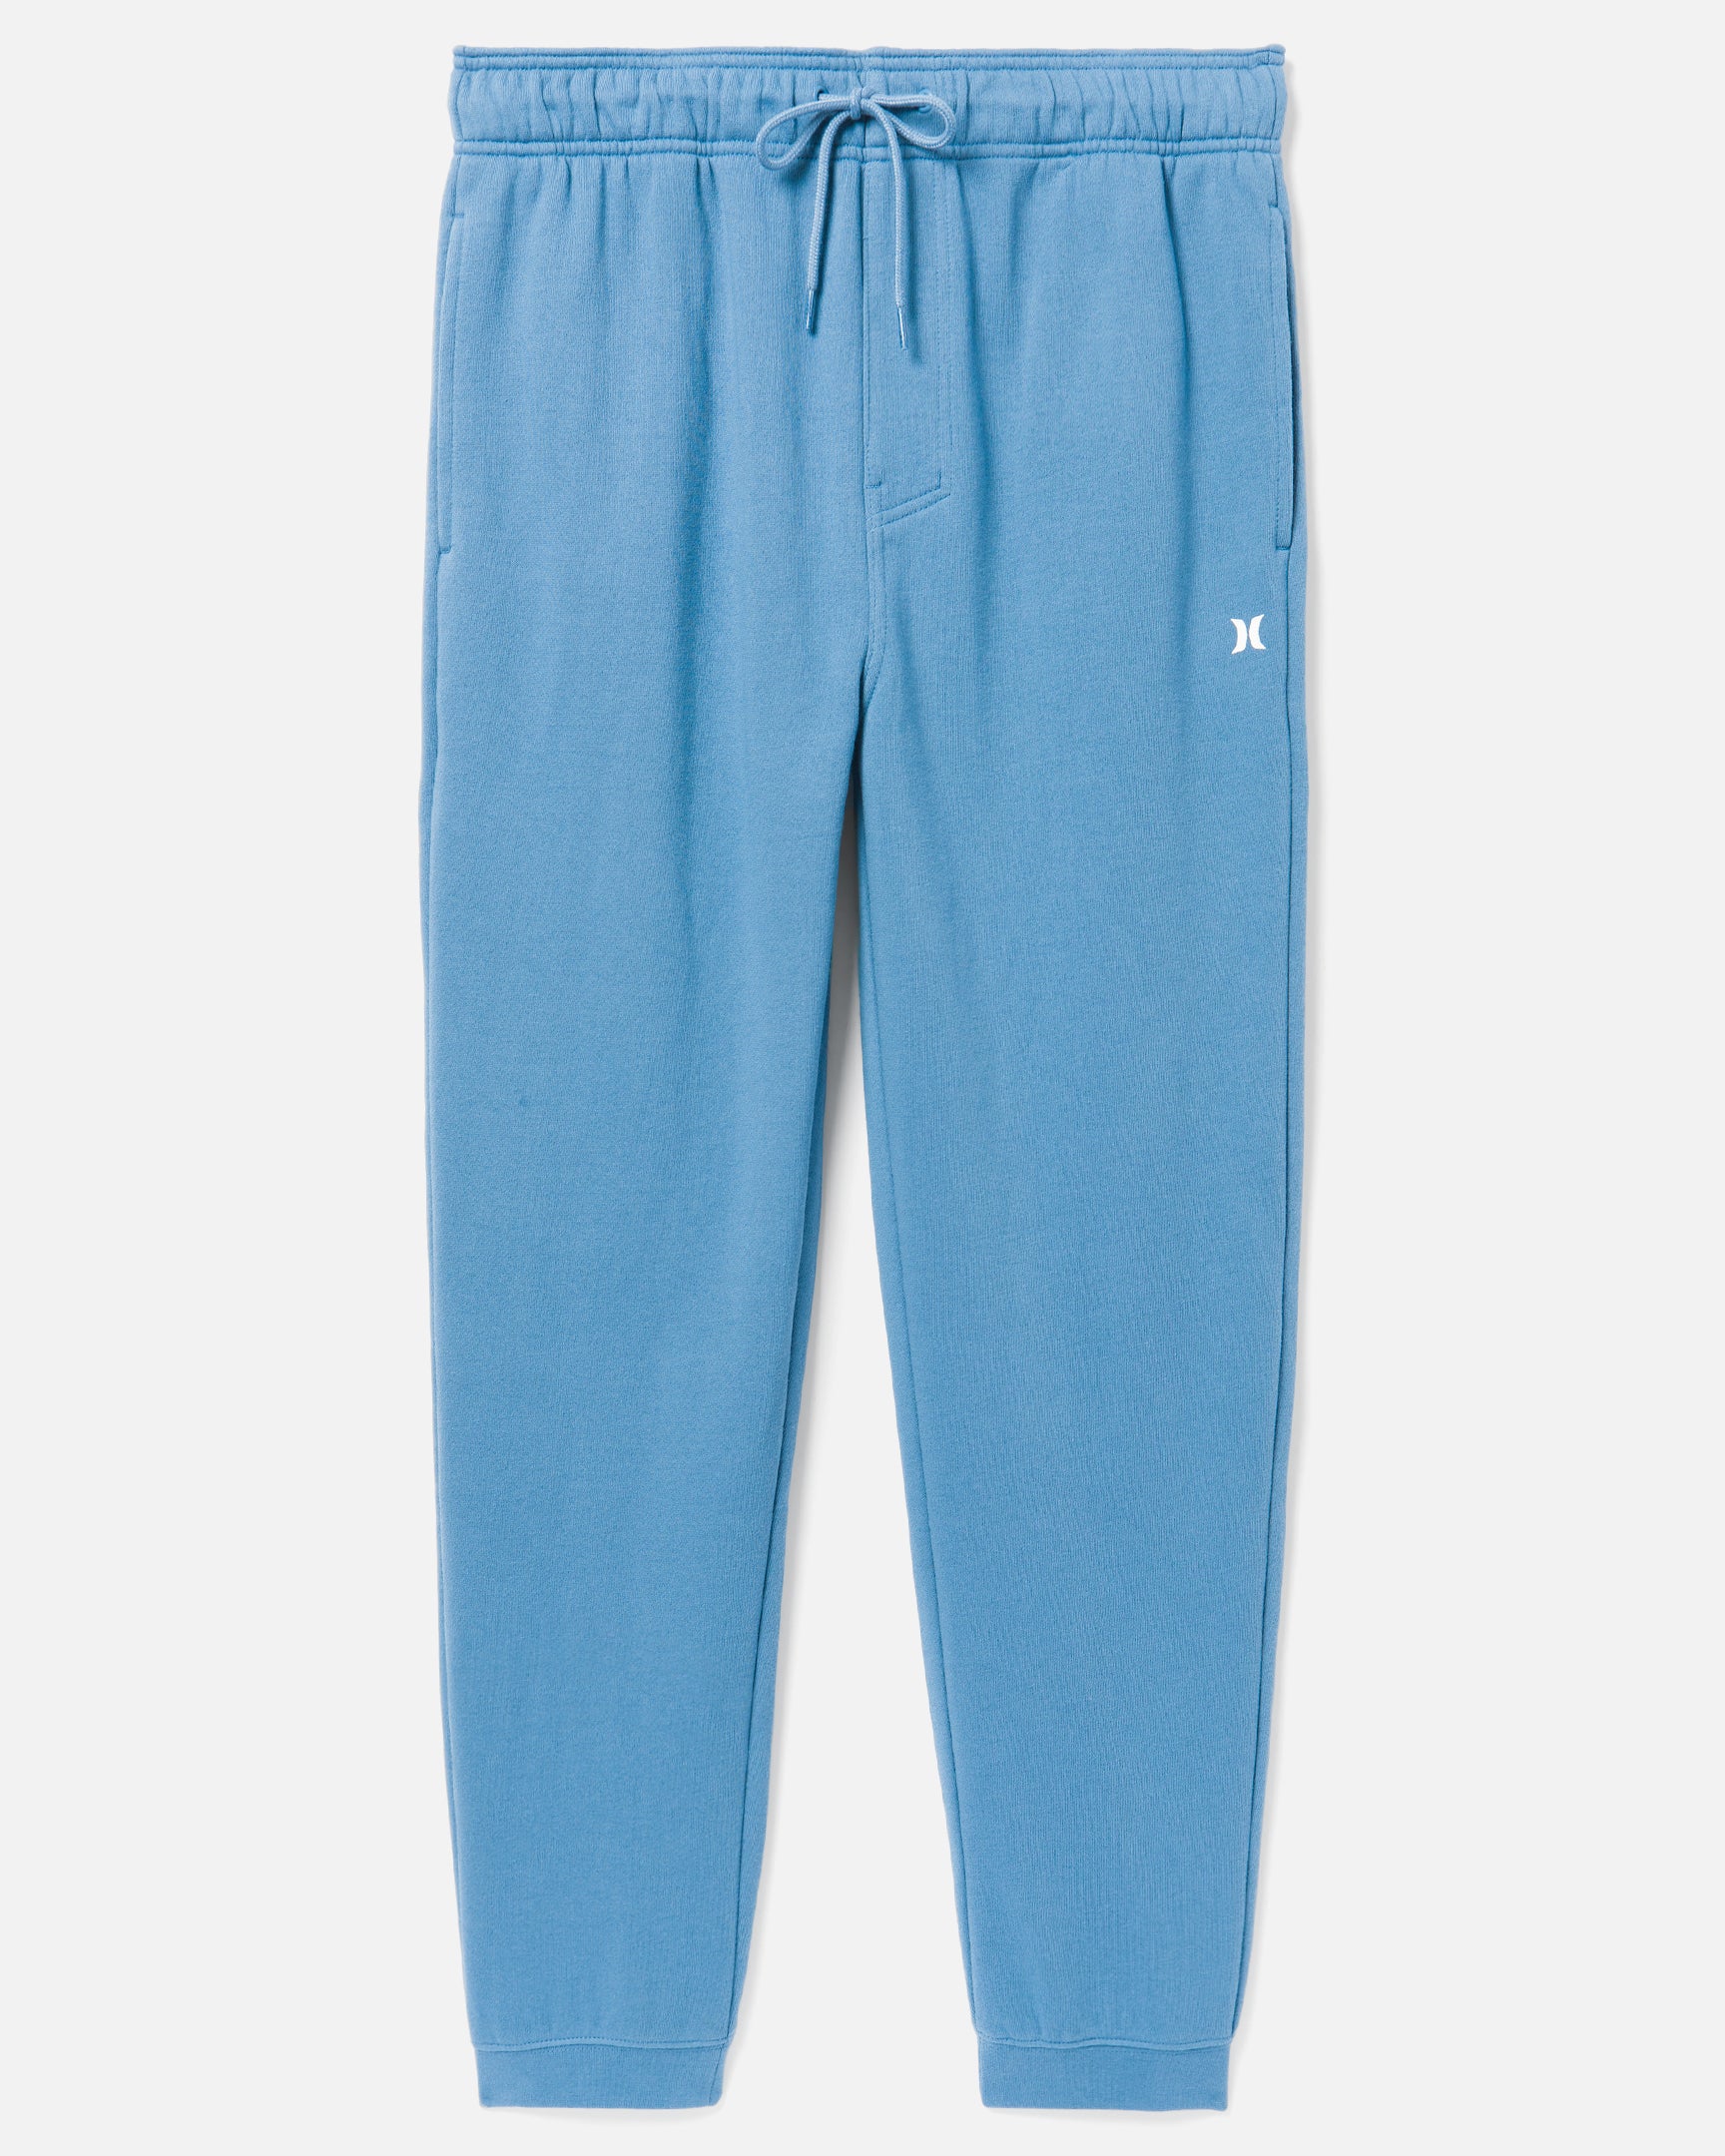 Dark Blue - Exist Boxed Logo Relaxed Fit Cotton Fleece Jogger | Hurley